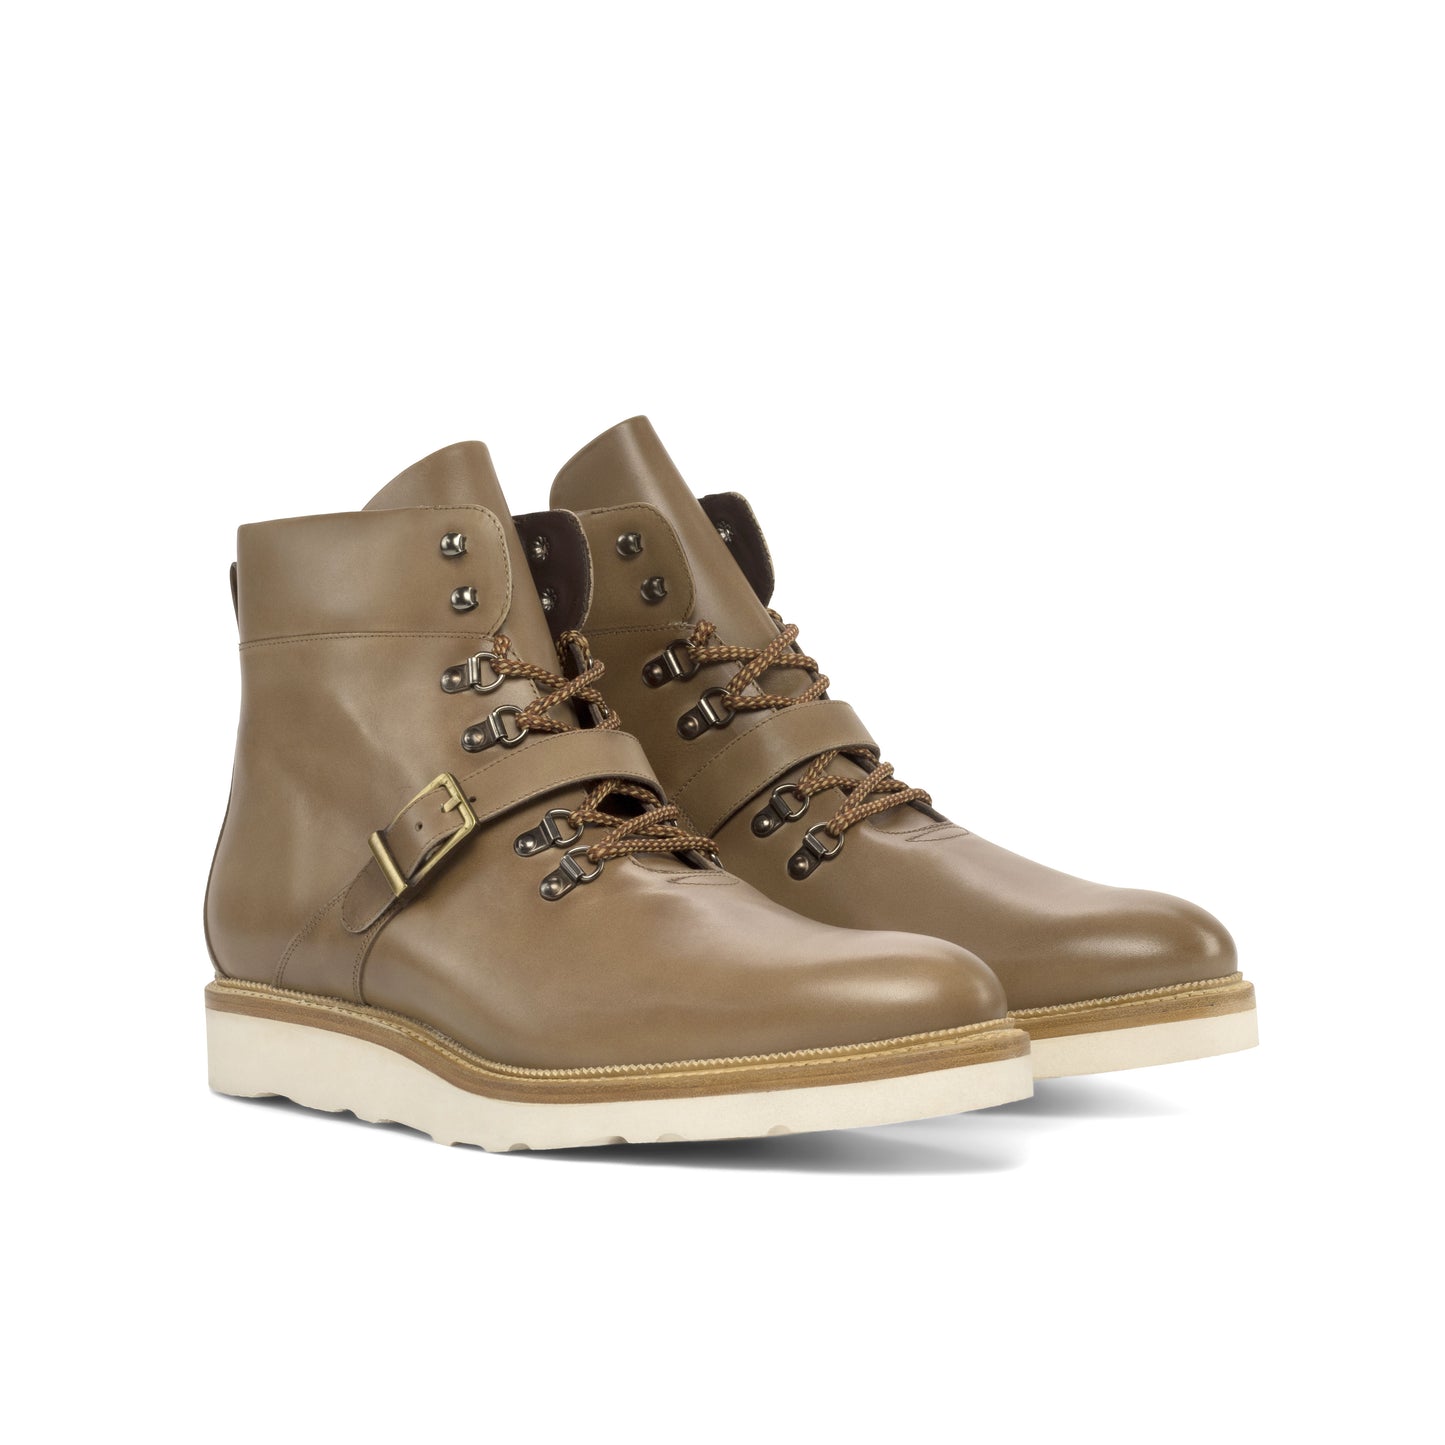 SUITCAFE Tan Leather Goodyear Men's Hiking Boot